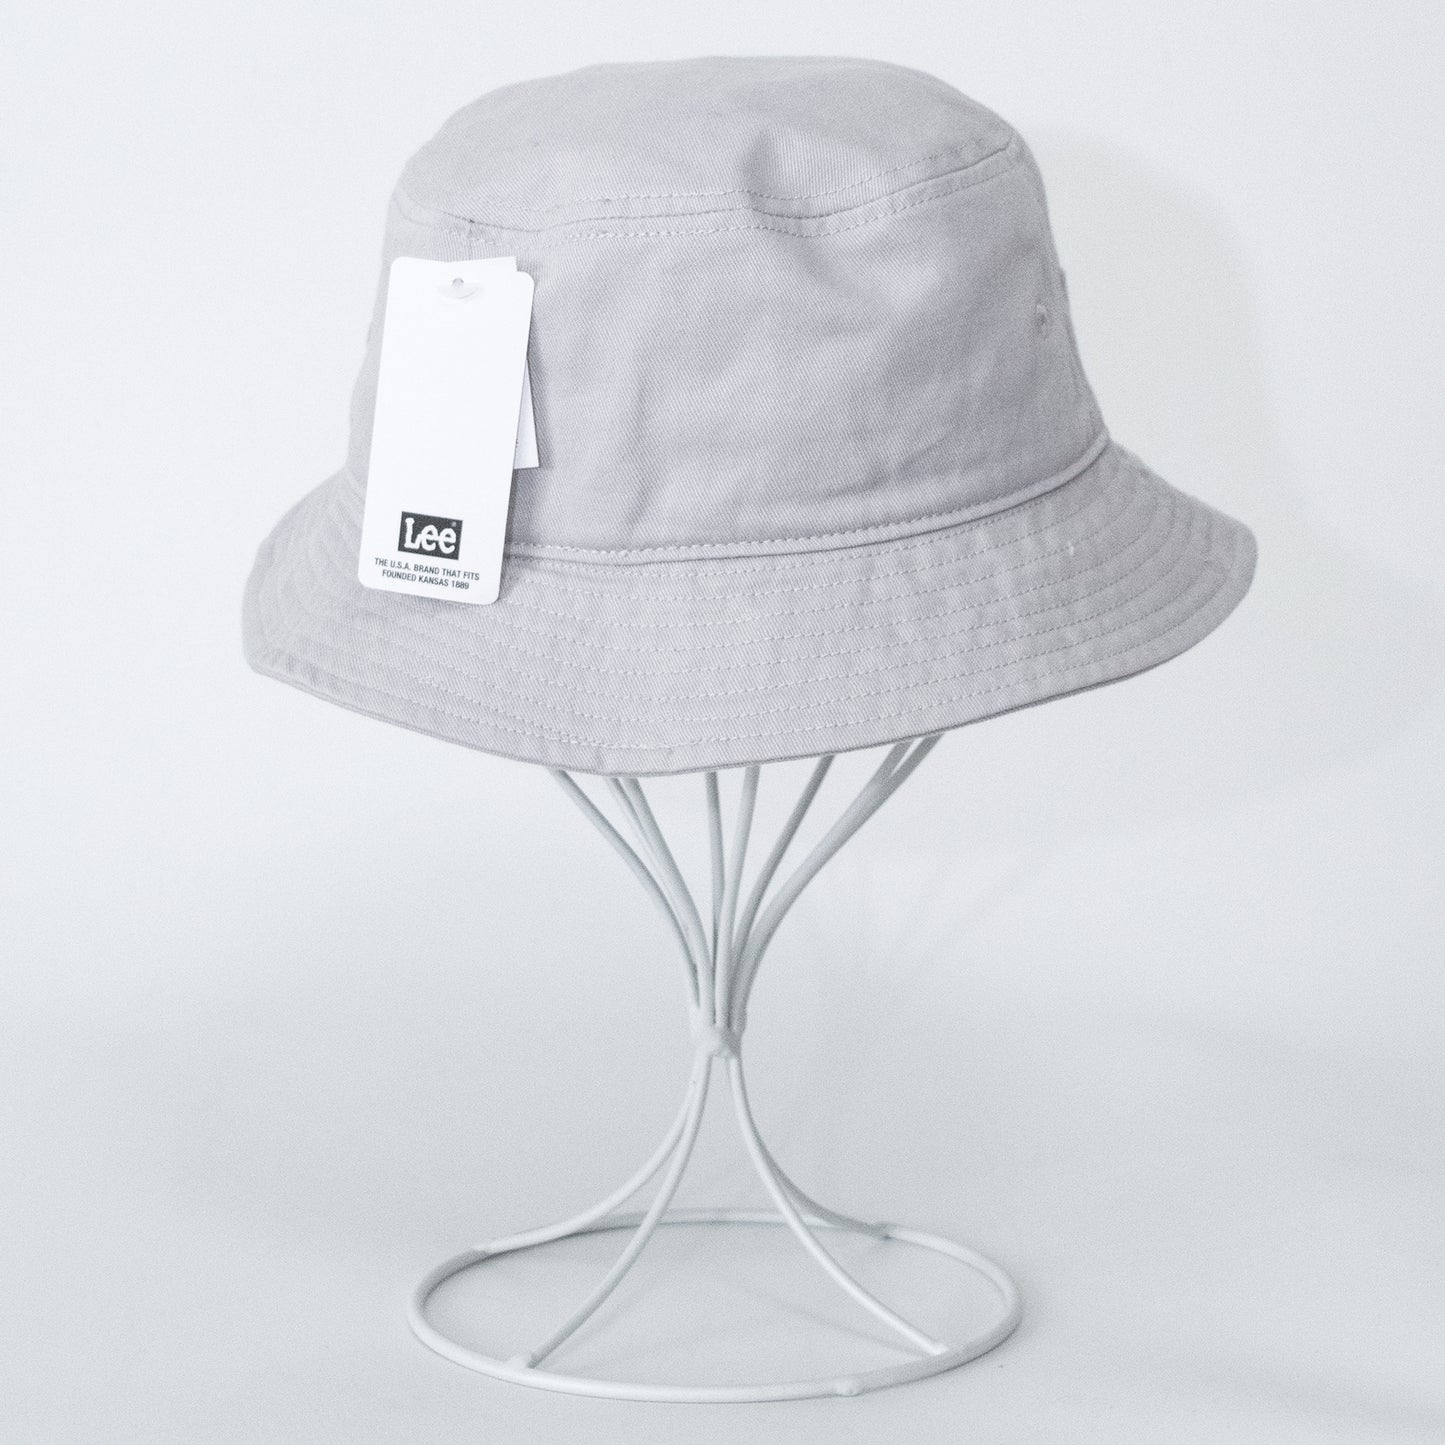 Lee logo embroidered bucket hat GRAY